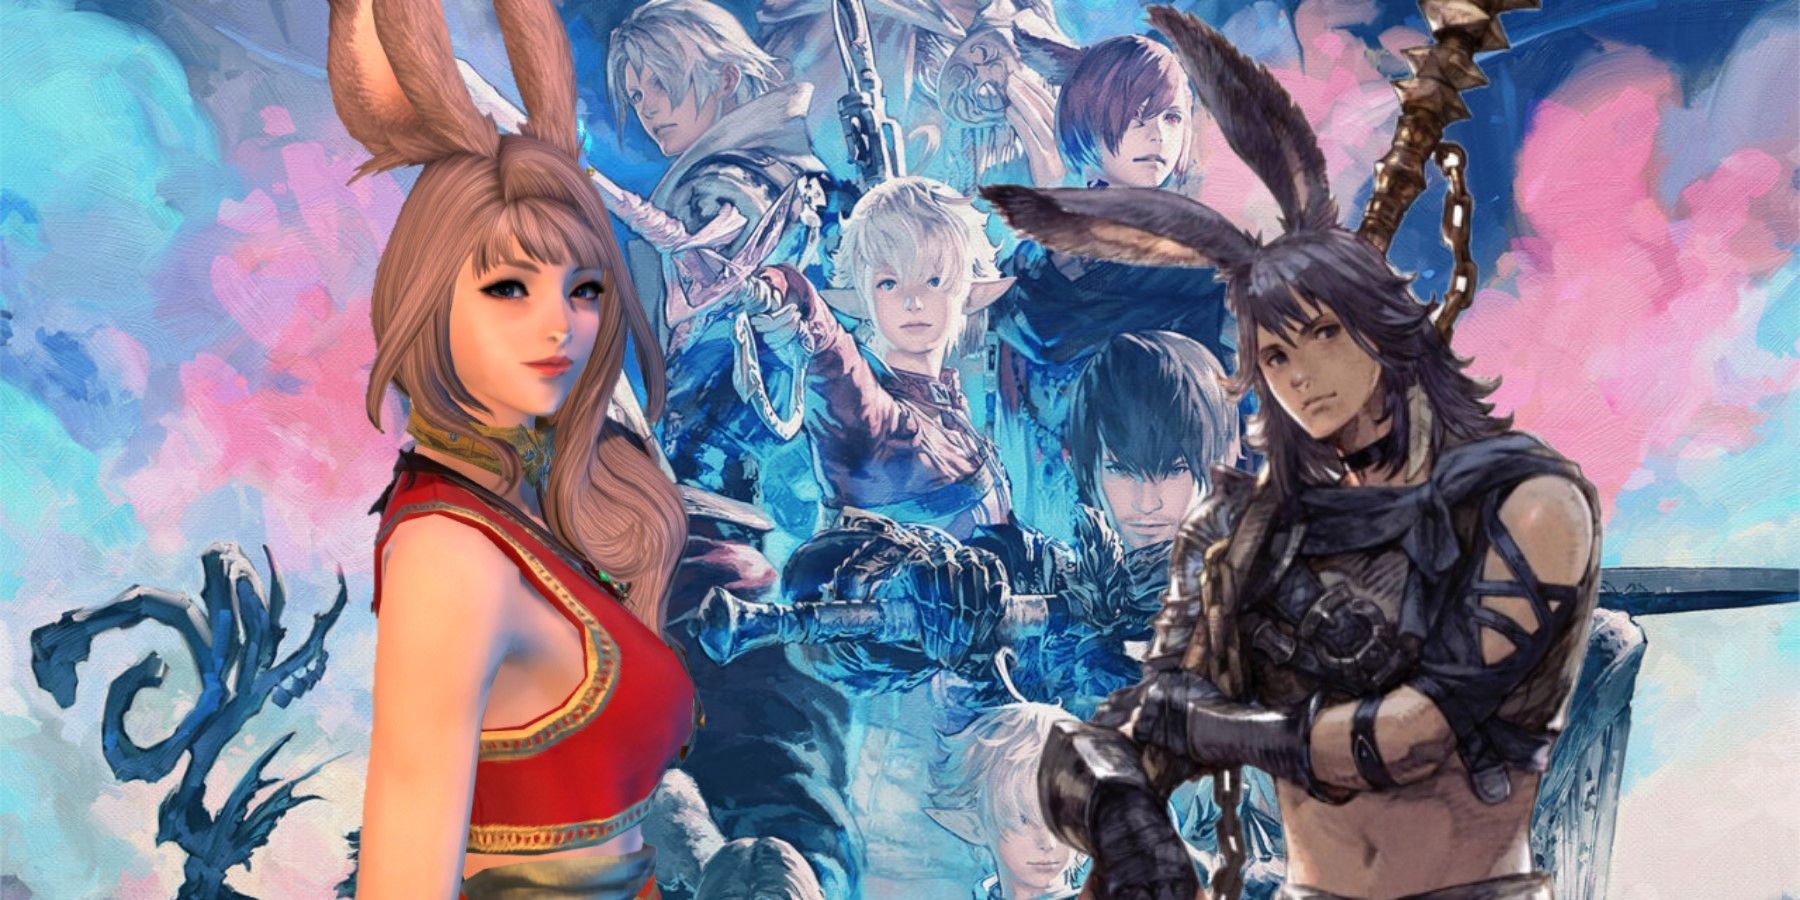 final-fantasy-14-s-character-creator-has-many-options-but-some-lingering-inclusivity-issues